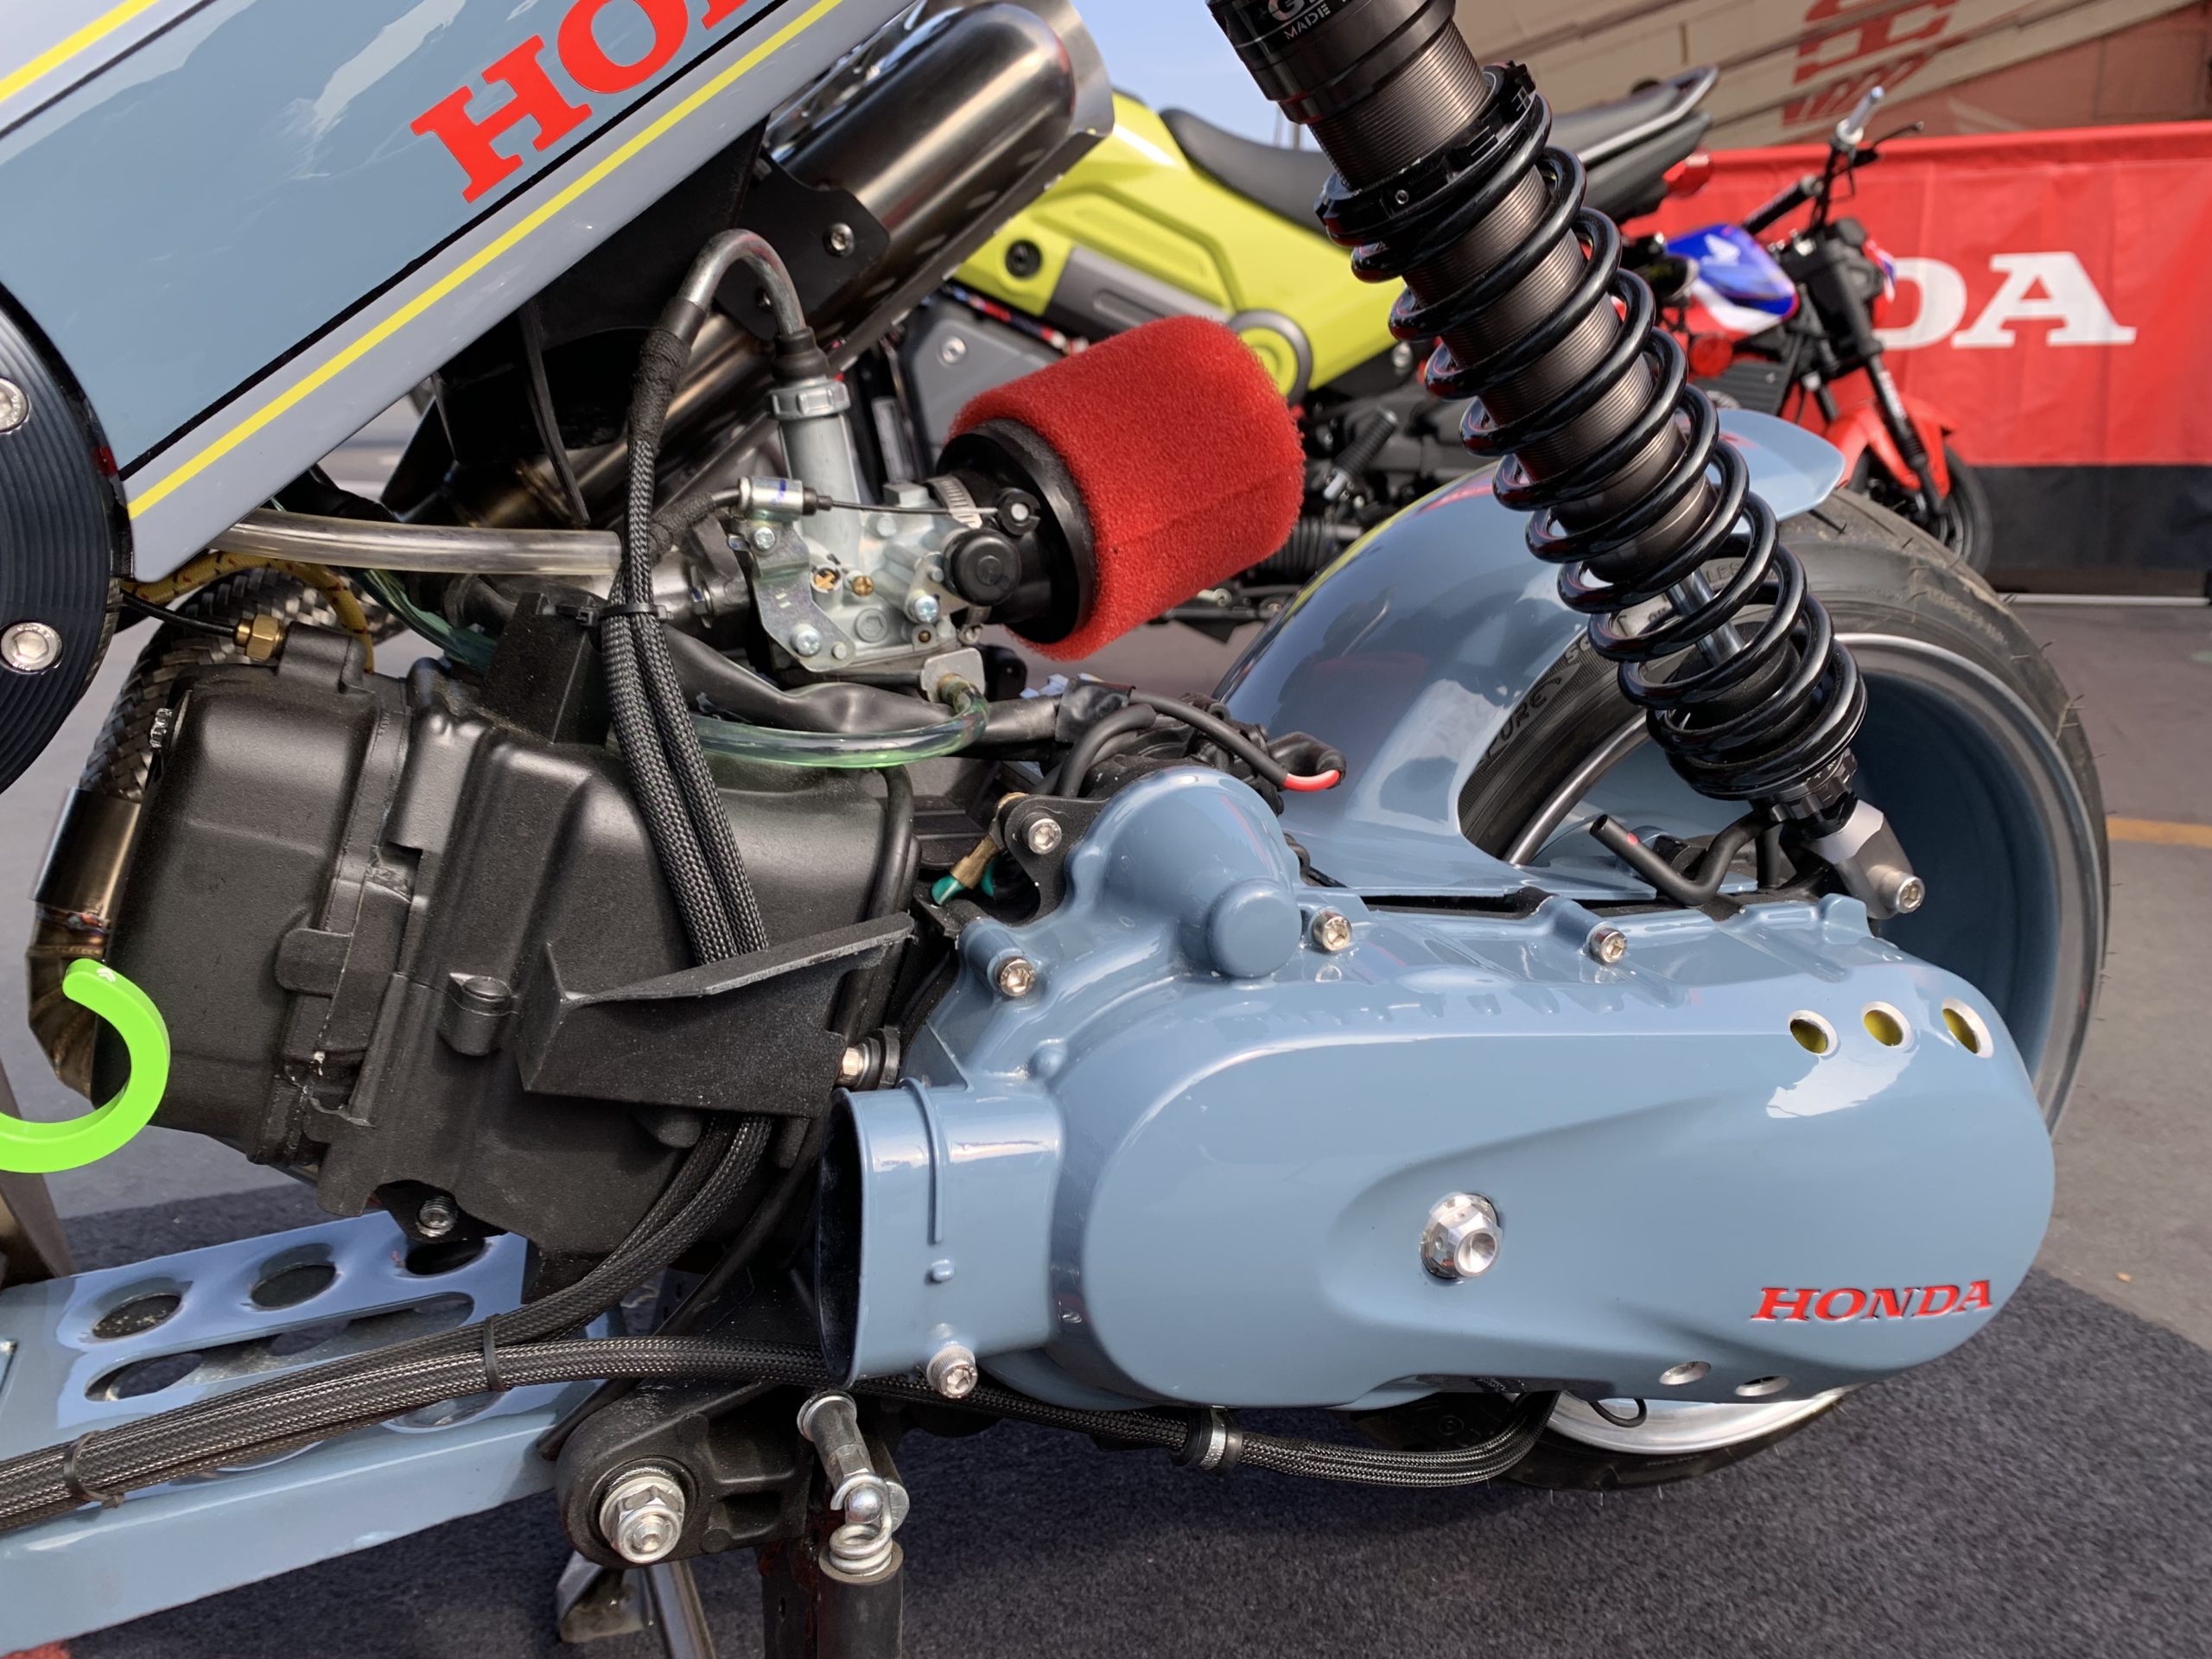 Engine and rear wheel of 2022 Honda Navi parked outdoors for IMS 2021